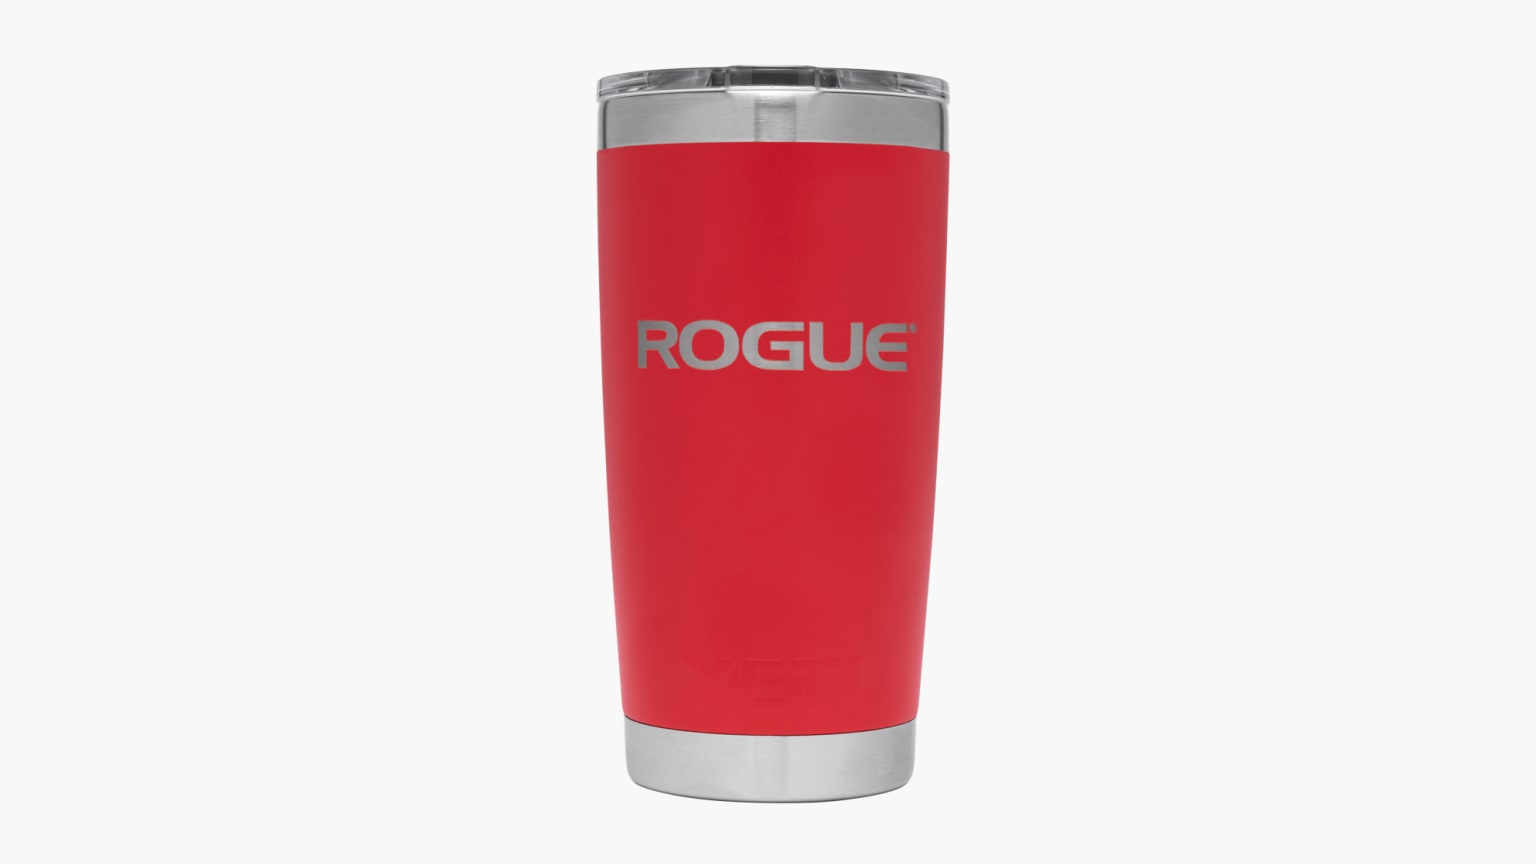 https://assets.roguefitness.com/f_auto,q_auto,c_limit,w_1536,b_rgb:f8f8f8/catalog/Gear%20and%20Accessories/Accessories/Shakers%20and%20Bottles/YT0098/YT0098-H_wfo6dl.png